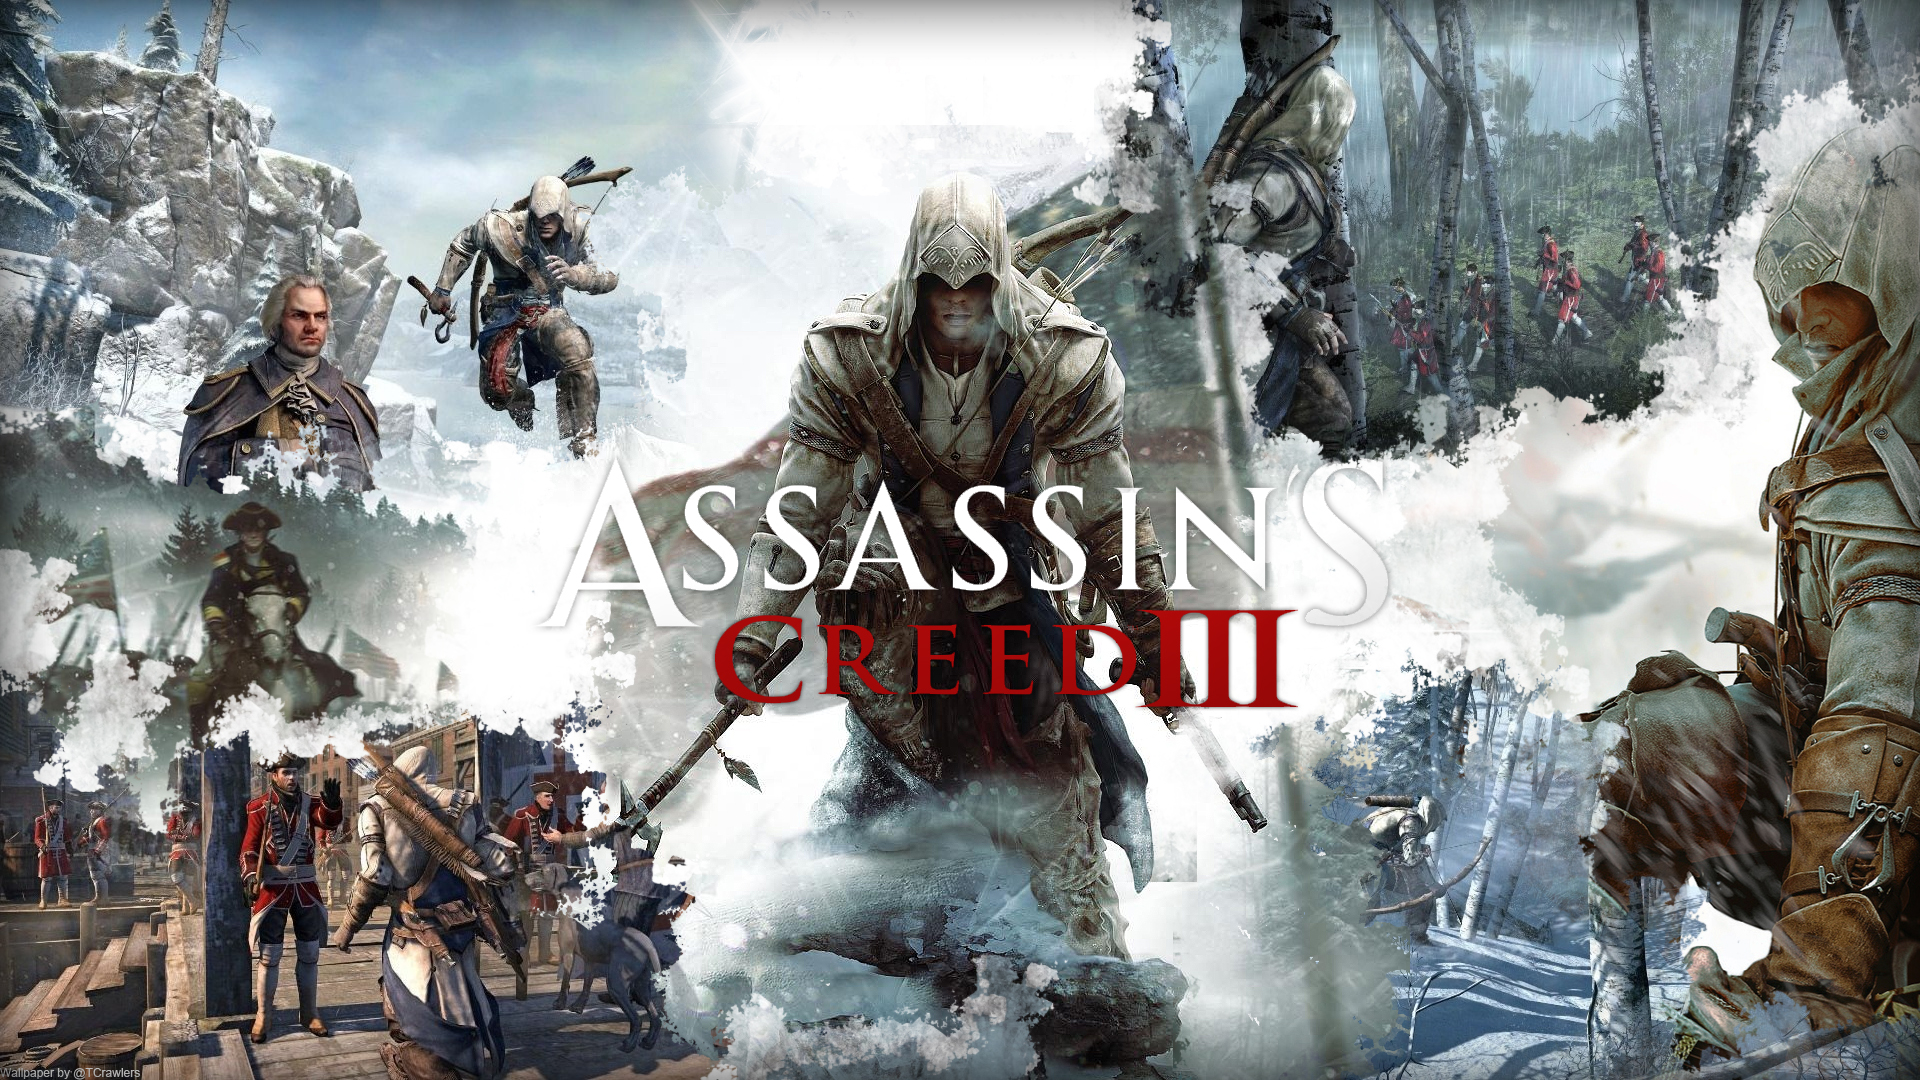 Assassins Creed 3 Save Game Save Game, Cheat codes, Game